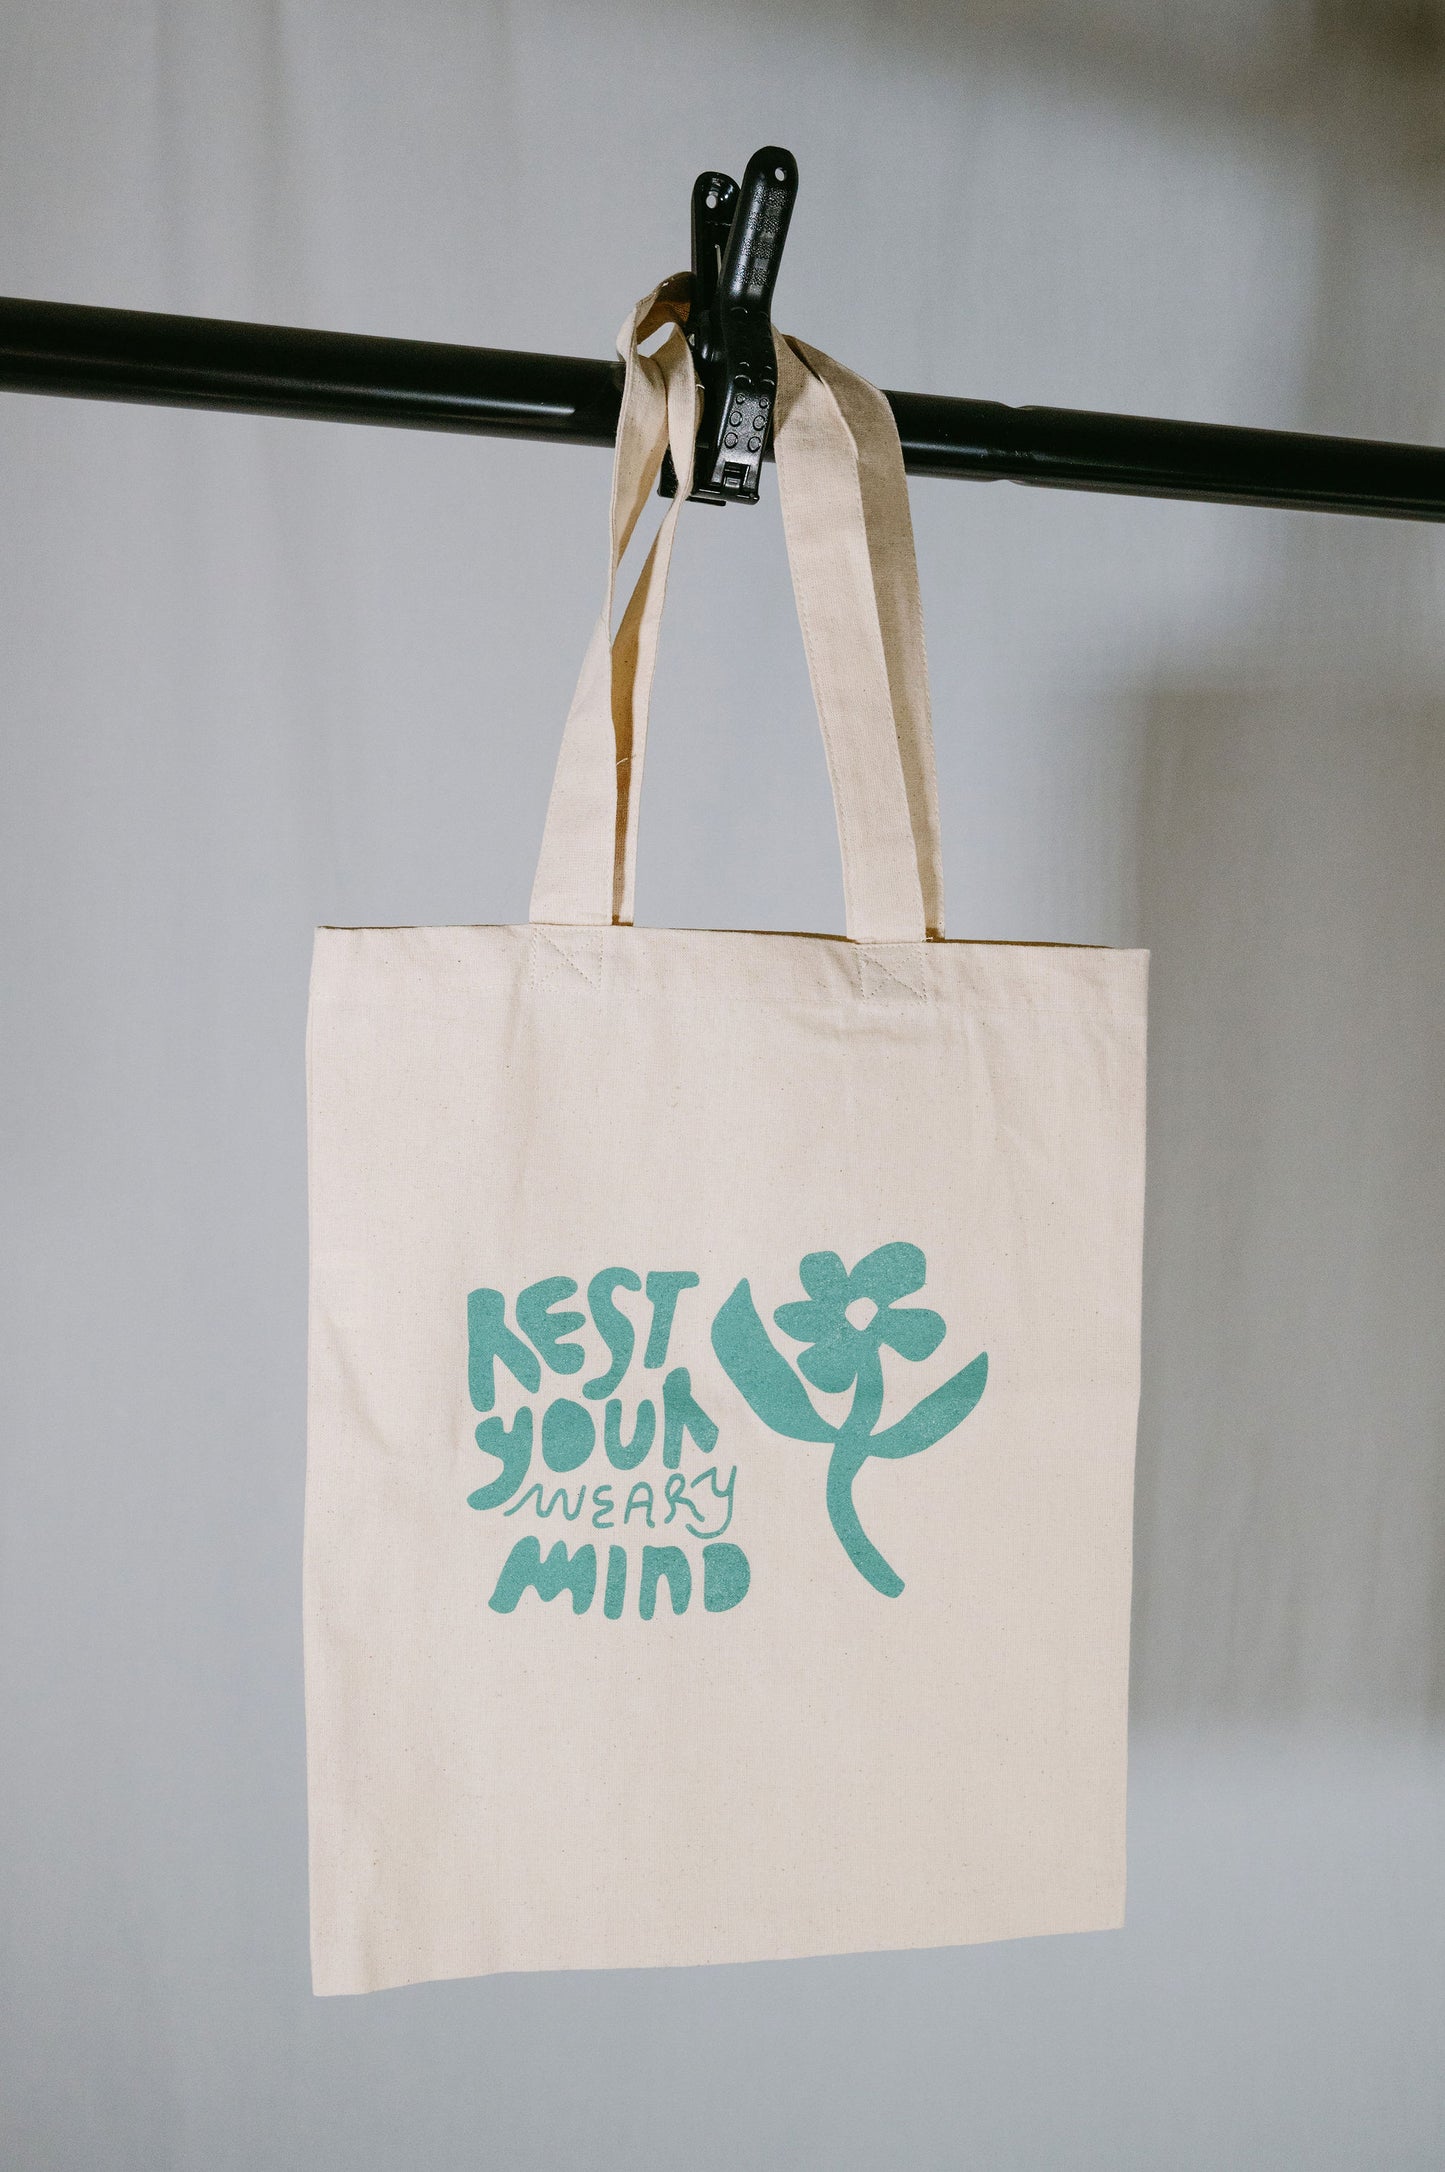 Rest Your Weary Mind Tote bag